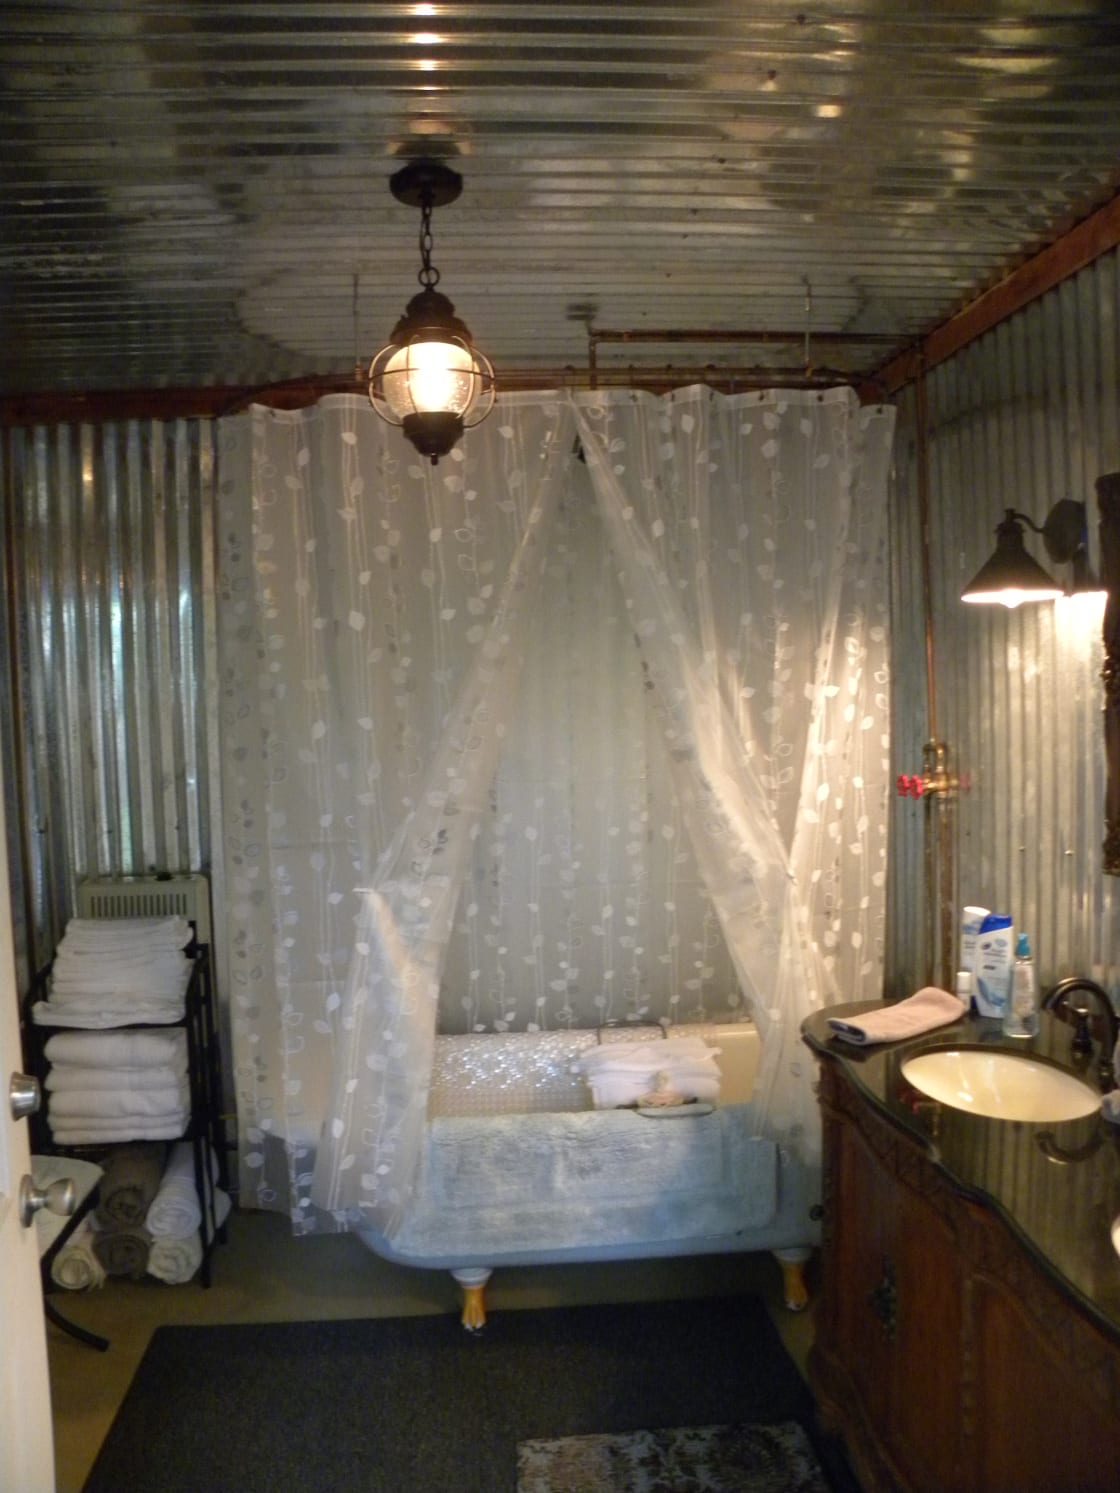 The Shower House is just a few feet away from all of the cabins with loads of towels, shampoo and soap along with bath salts and loads of other stuff you might not load up for your trip.